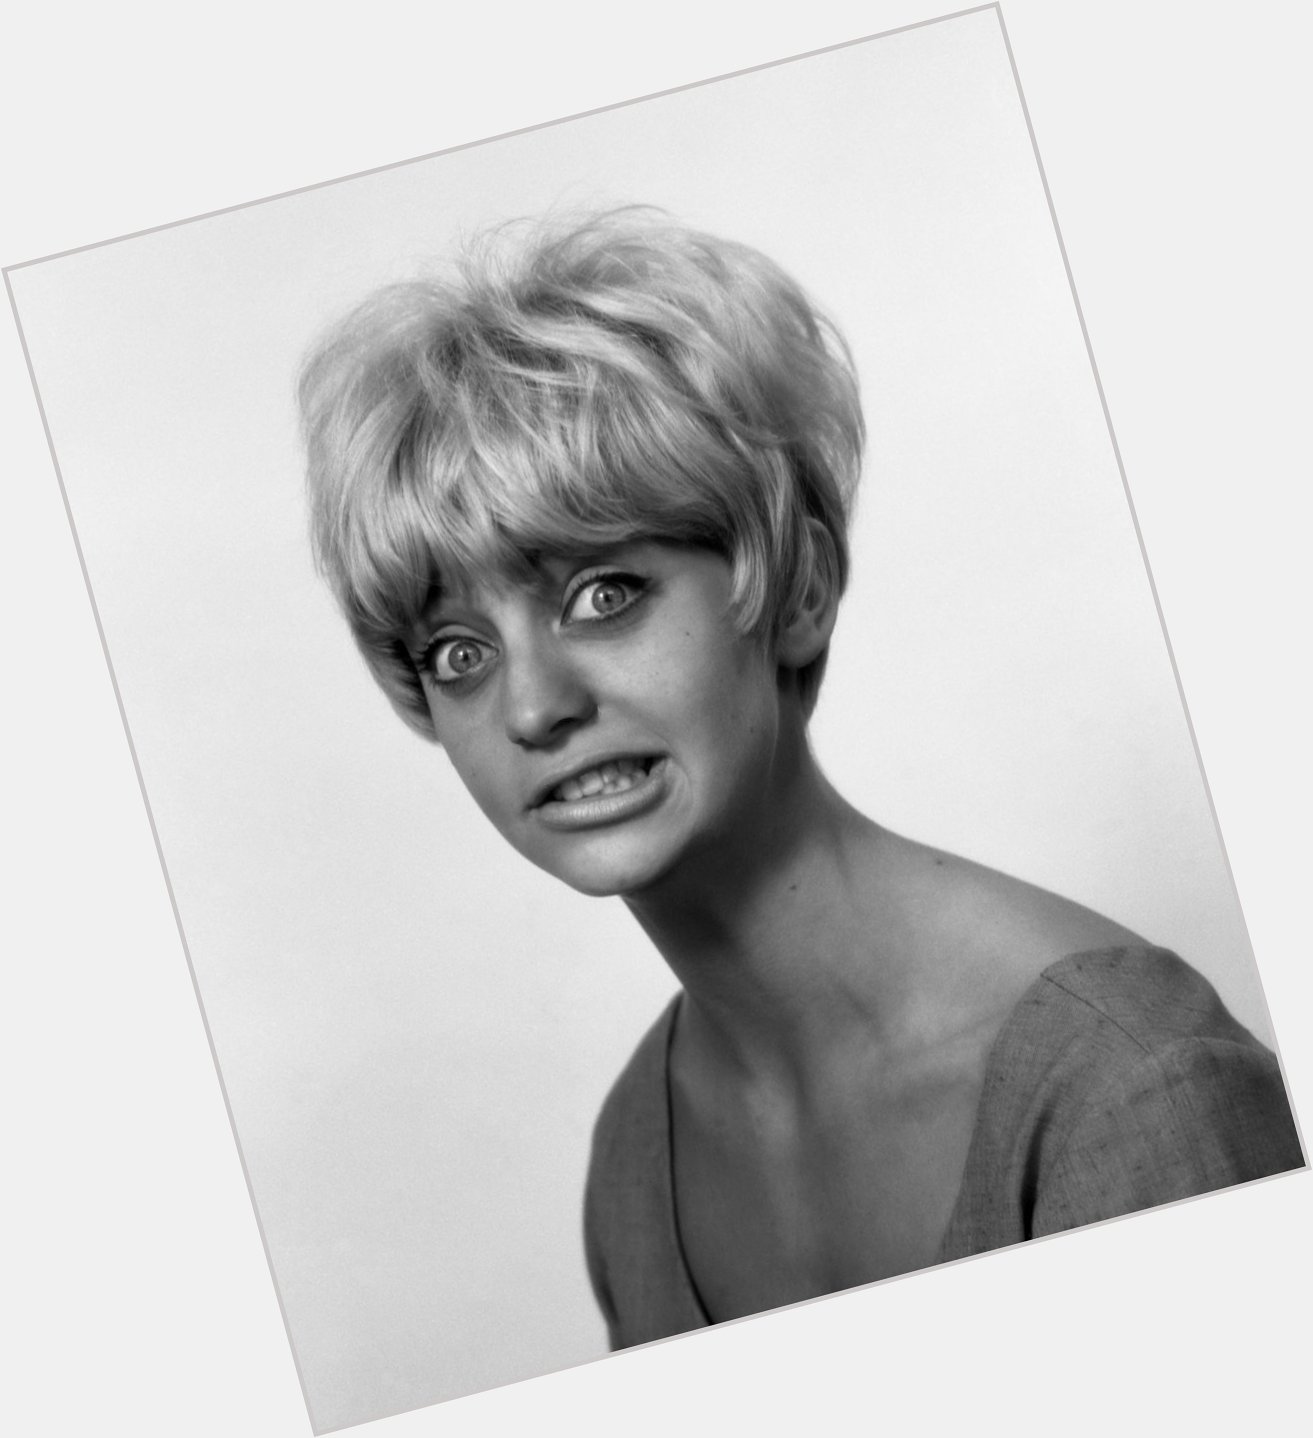 Hey Goldie Hawn is turning 75 today! Happy Birthday! 